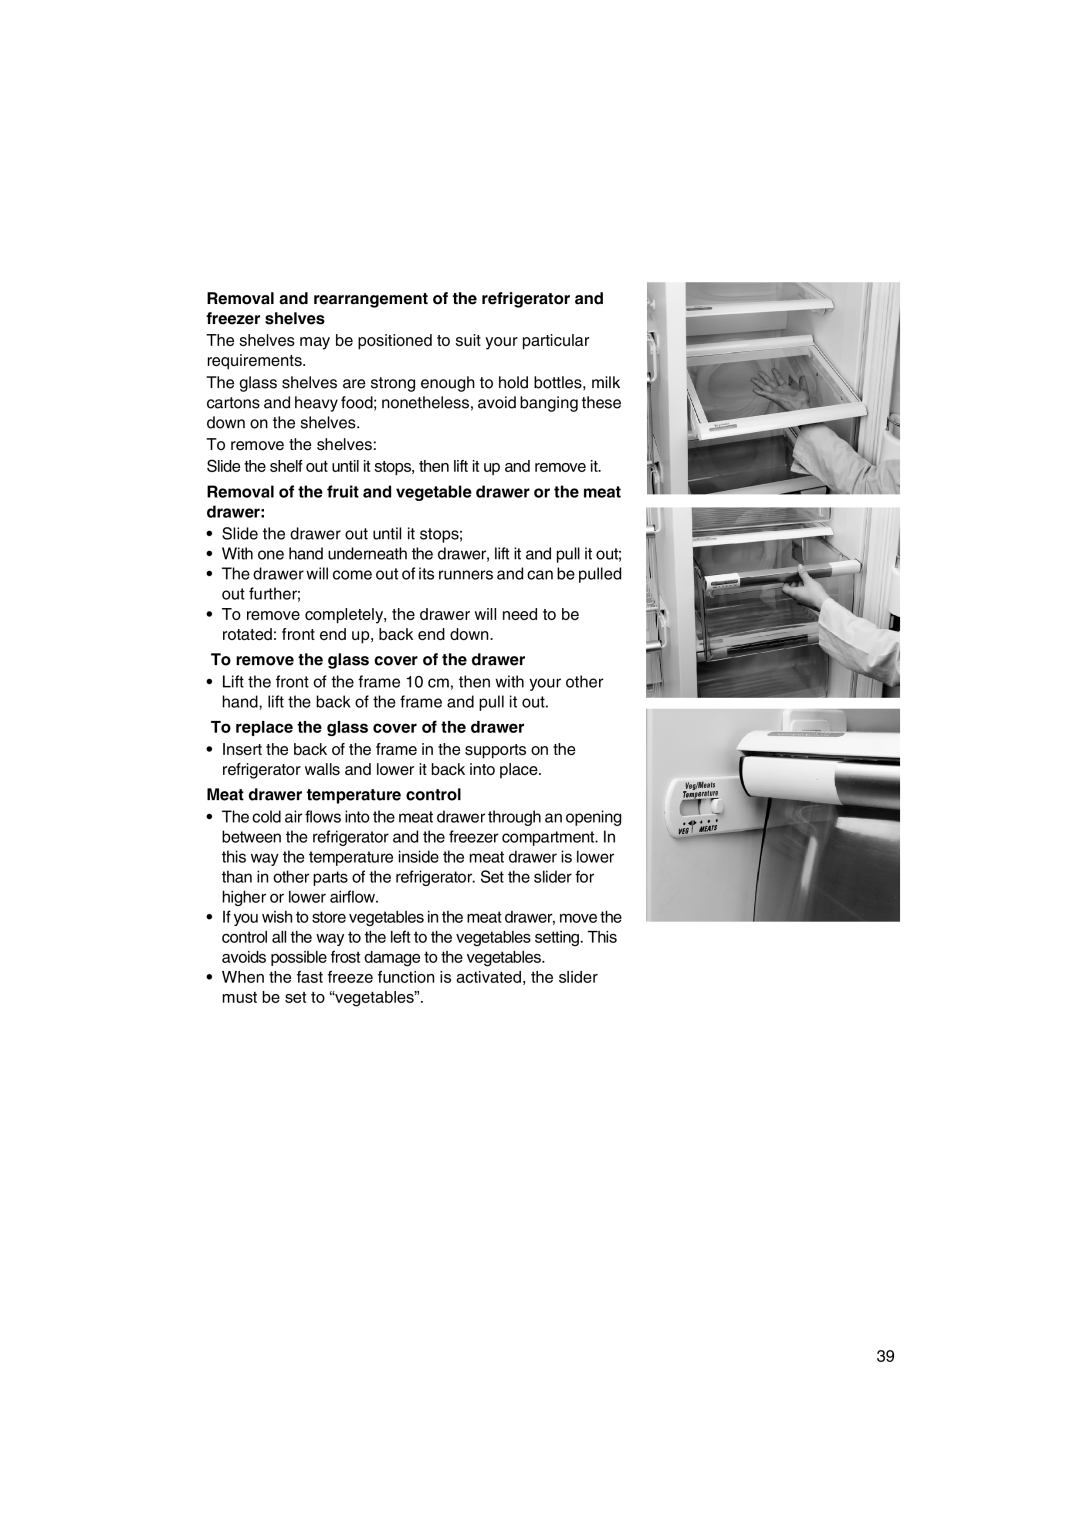 Smeg FA550XBI Removal and rearrangement of the refrigerator and freezer shelves, To remove the glass cover of the drawer 